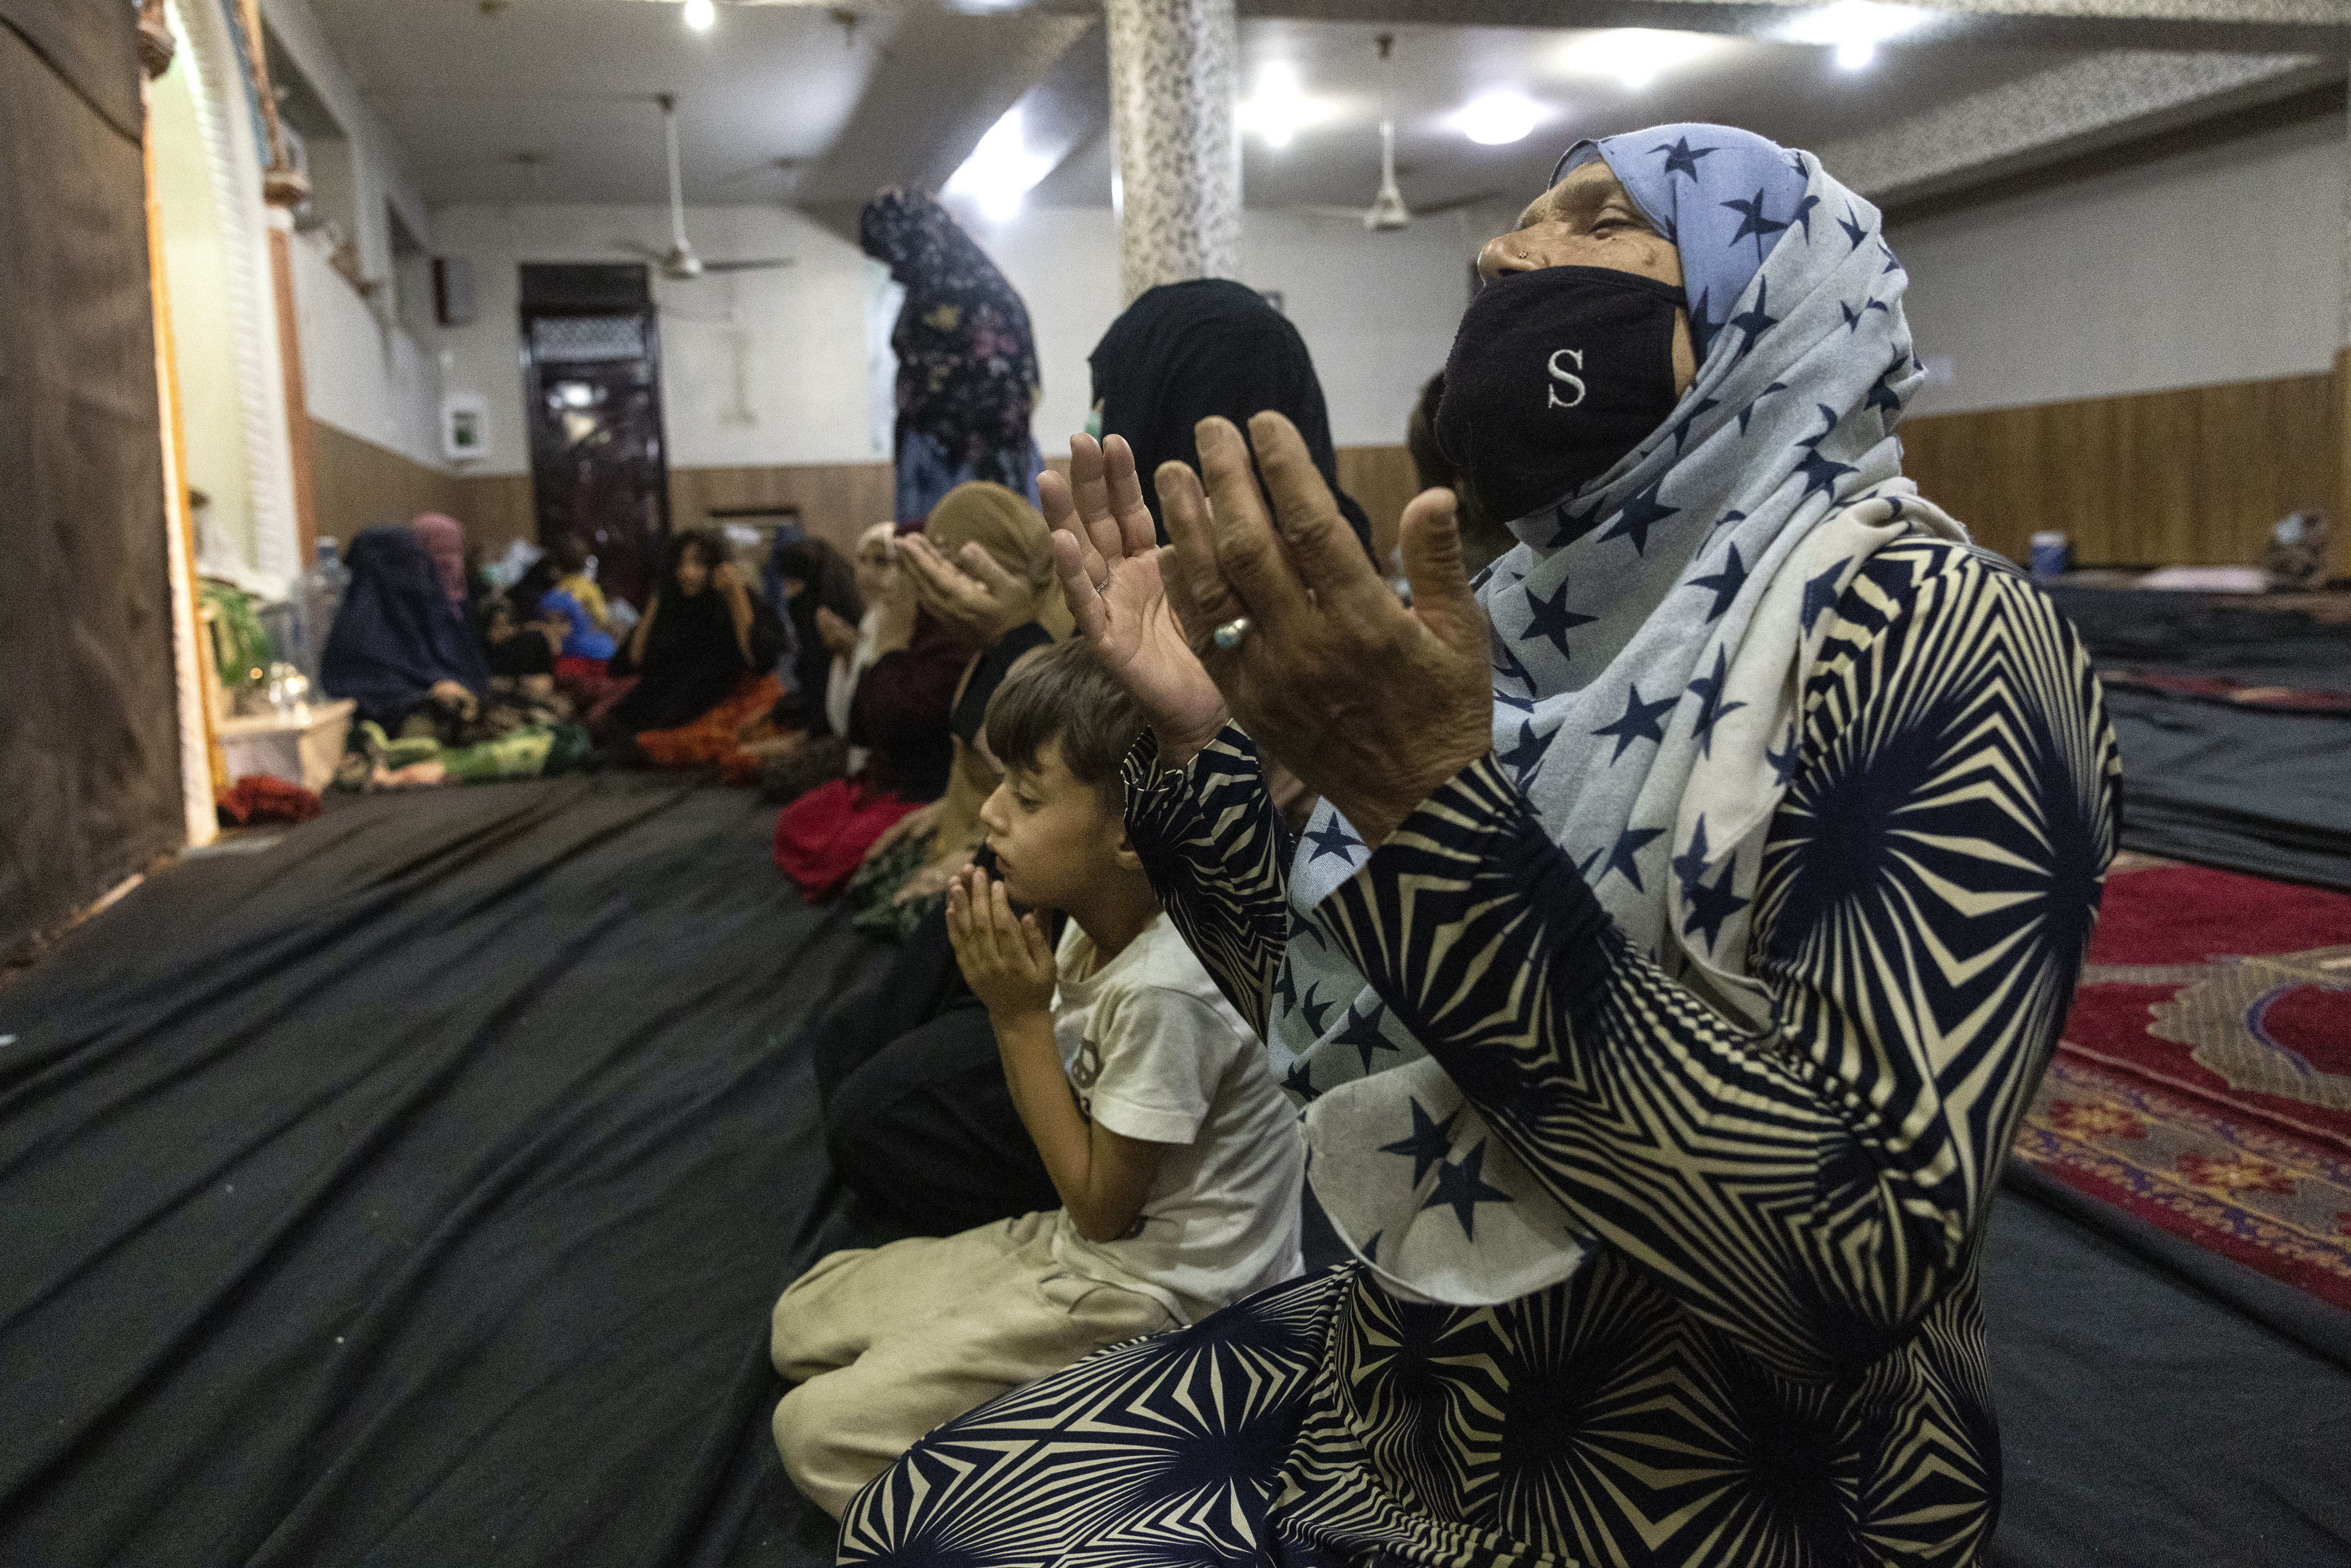 Women and children from Kunduz pray at a mosque in Kabul where they are seeking shelter on August 13, 2021.